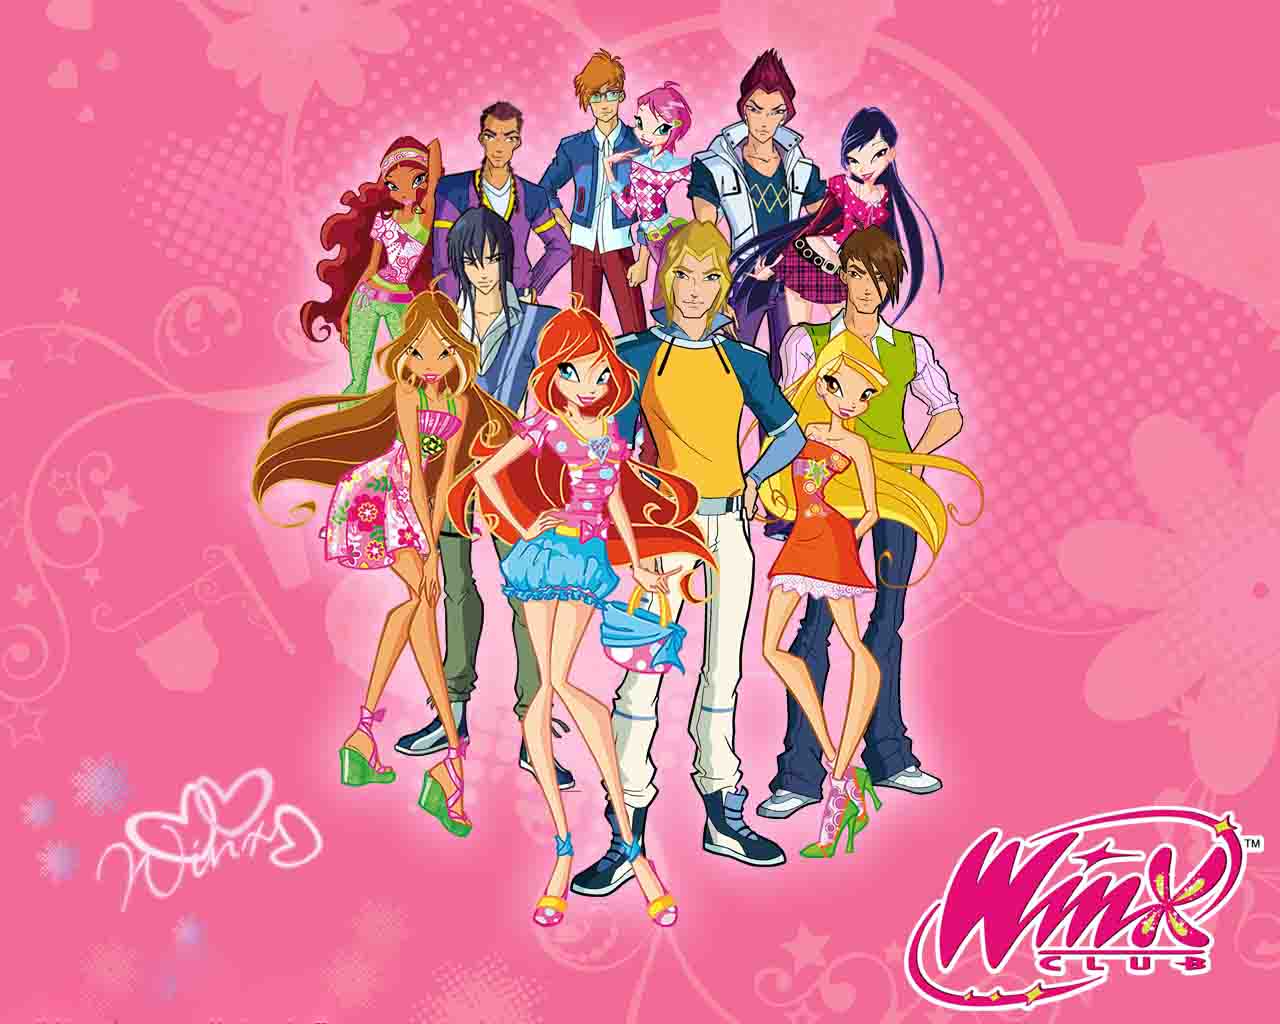 Winx Club Latest HD Wallpapers Free Download New HD Wallpapers